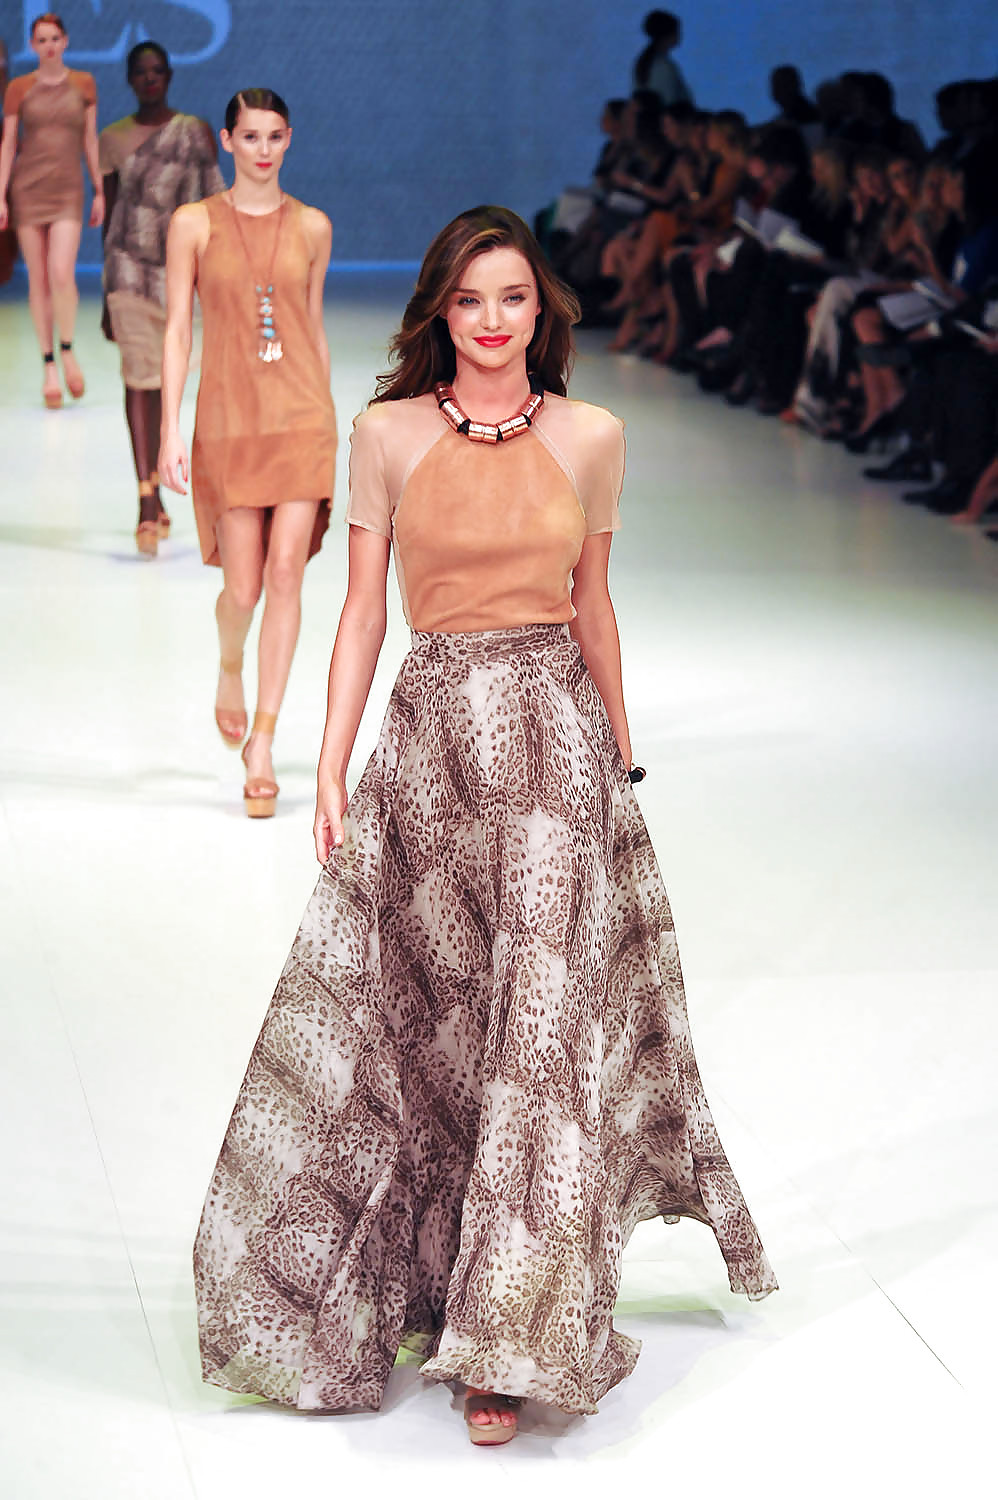 Miranda Kerr Back on The Runway with Her New Boobs #8111226